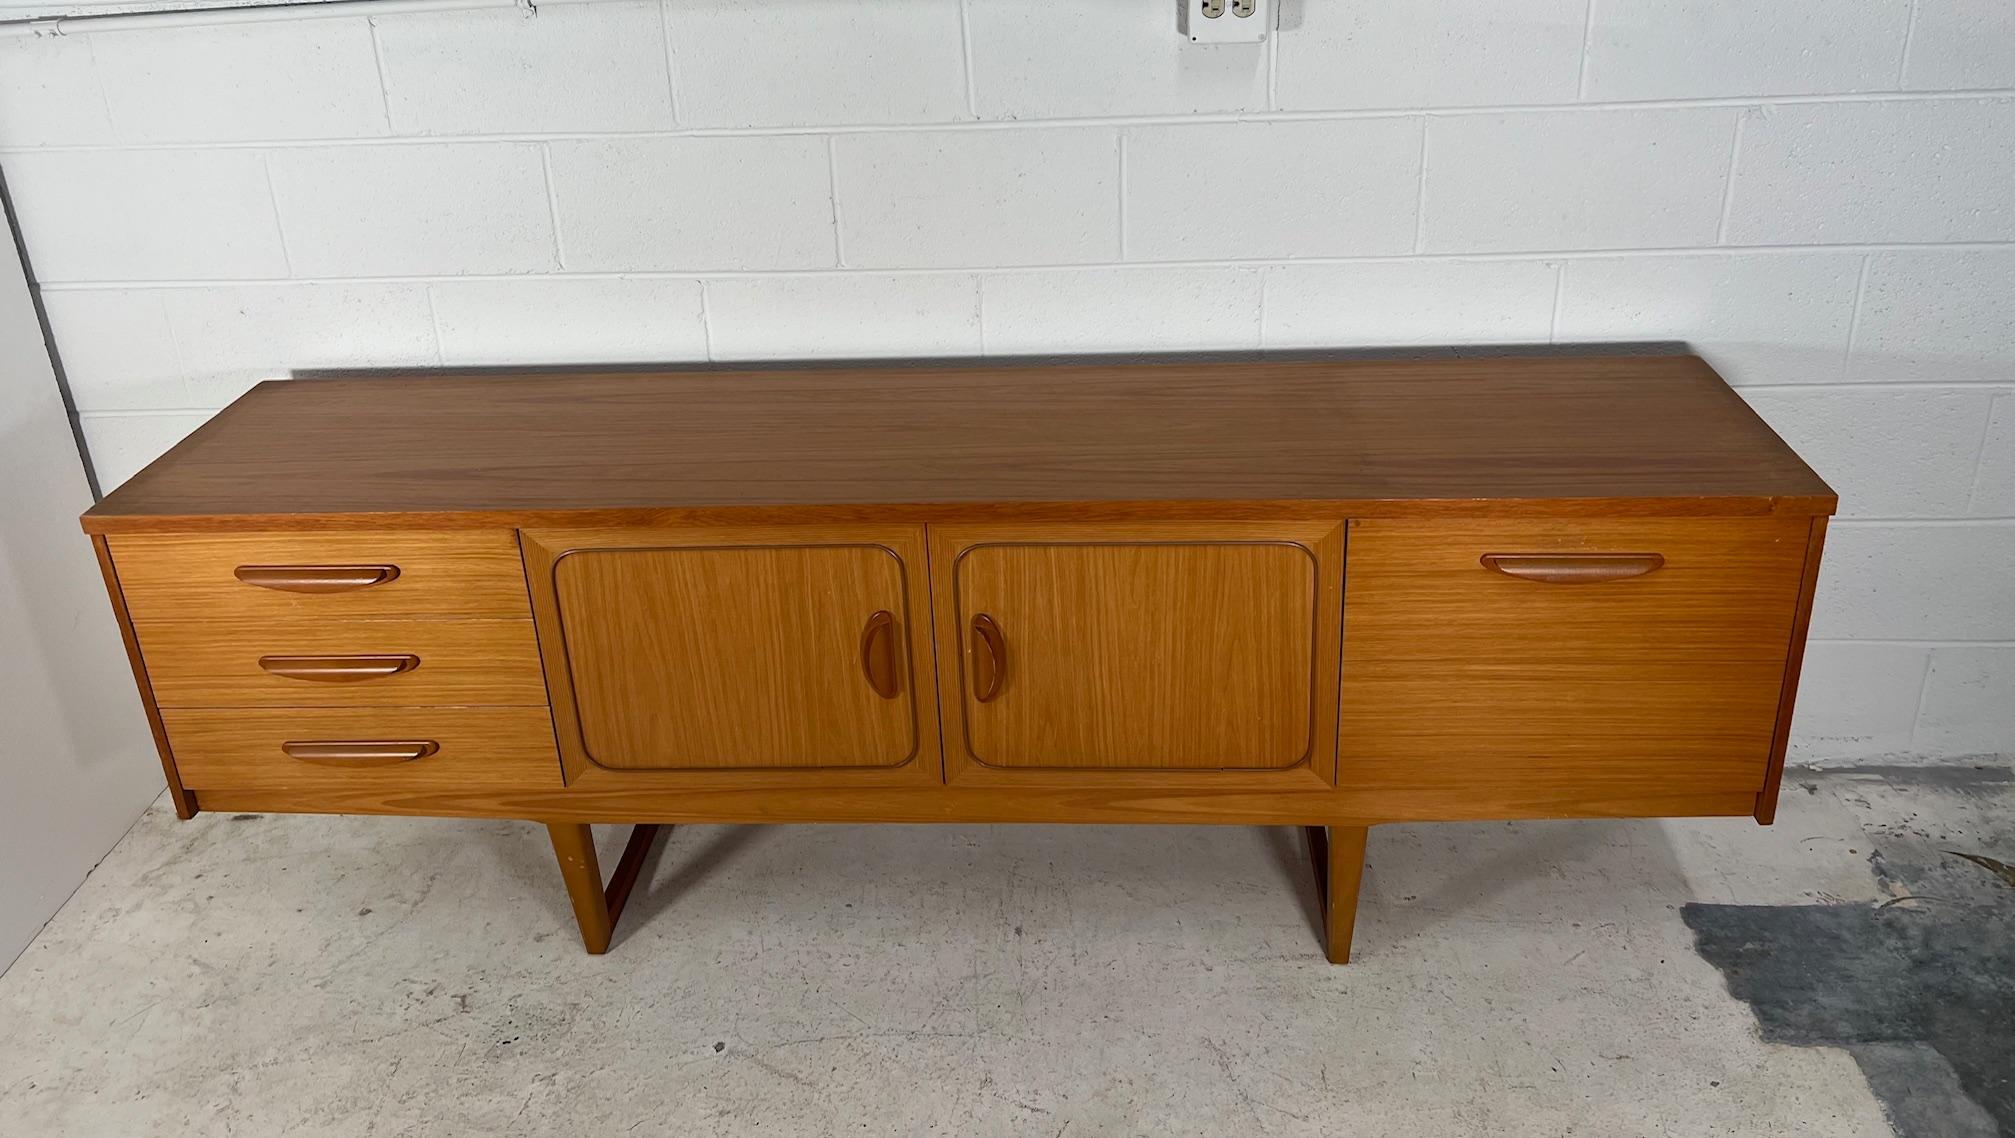 Light wood credenza by Stateroom. Made in England.

Featuring sculpted handles and a drop down door bar cabinet. Very good condition overall. Chip on one drawer handles. Some marks and light scratches as shown in photos. Chip on right corner. Some